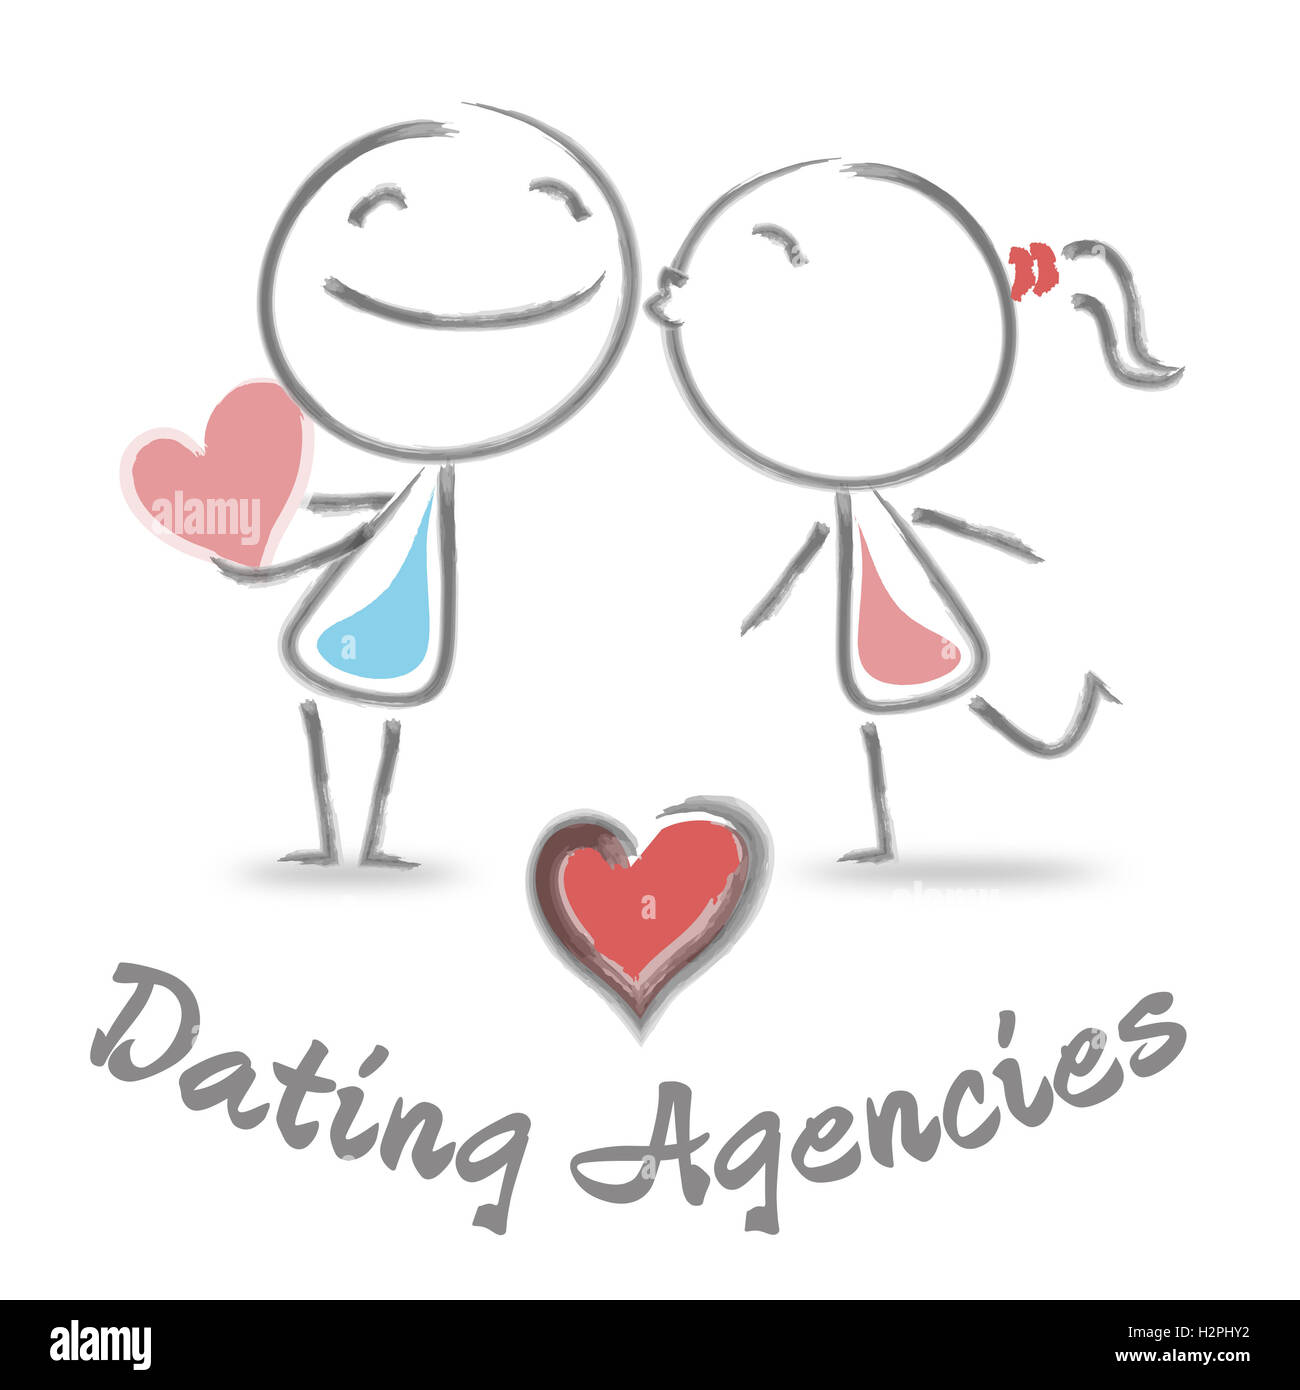 Dating Agencies Indicating Find Love And Affection Stock Photo